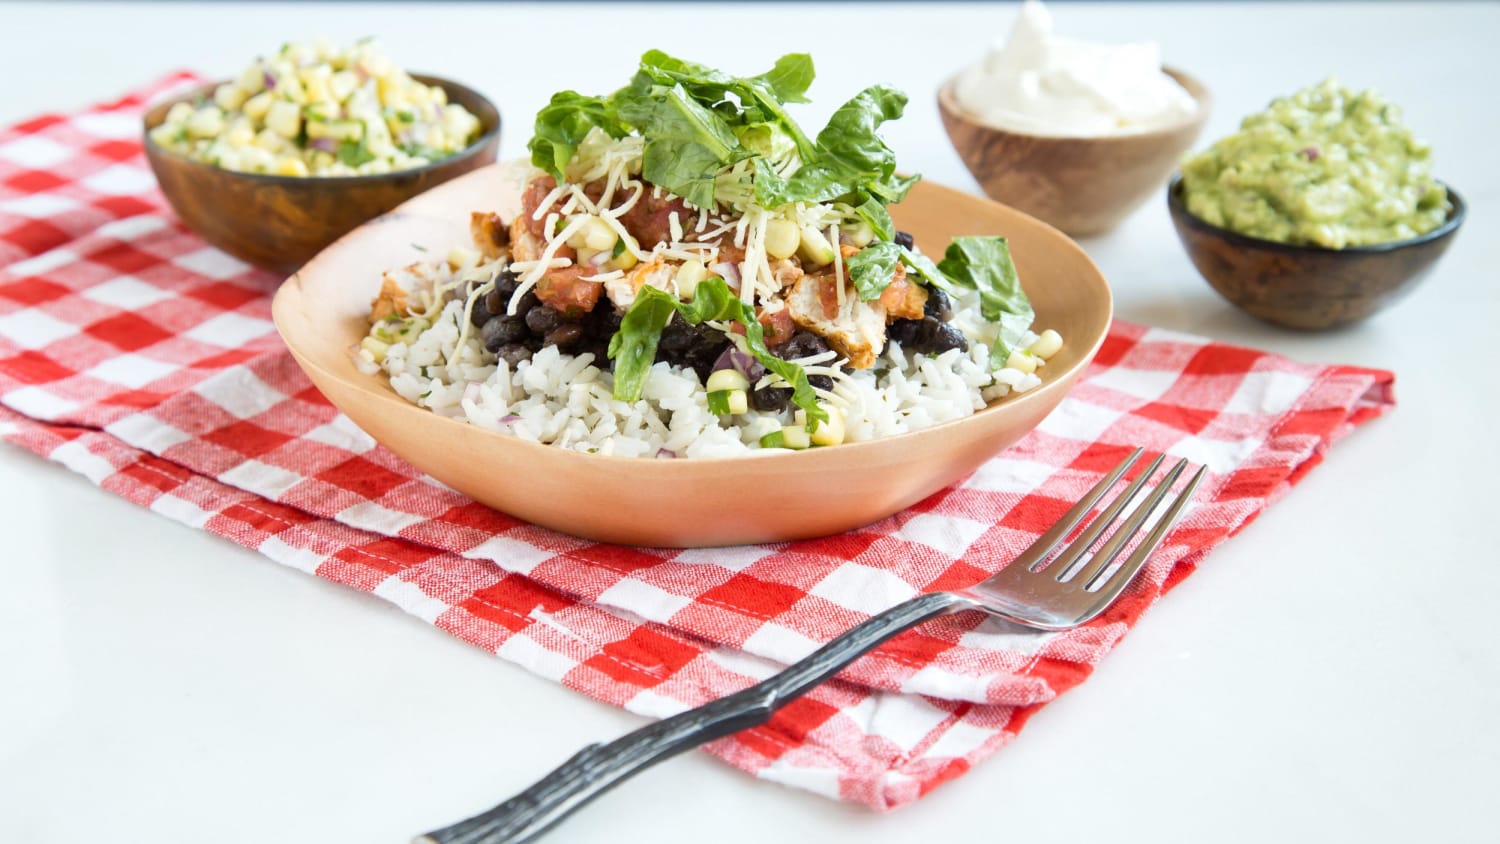 https://media-cldnry.s-nbcnews.com/image/upload/newscms/2015_15/482121/burrito-bowl-recipe-finished-today-150407-tease-ms.jpg